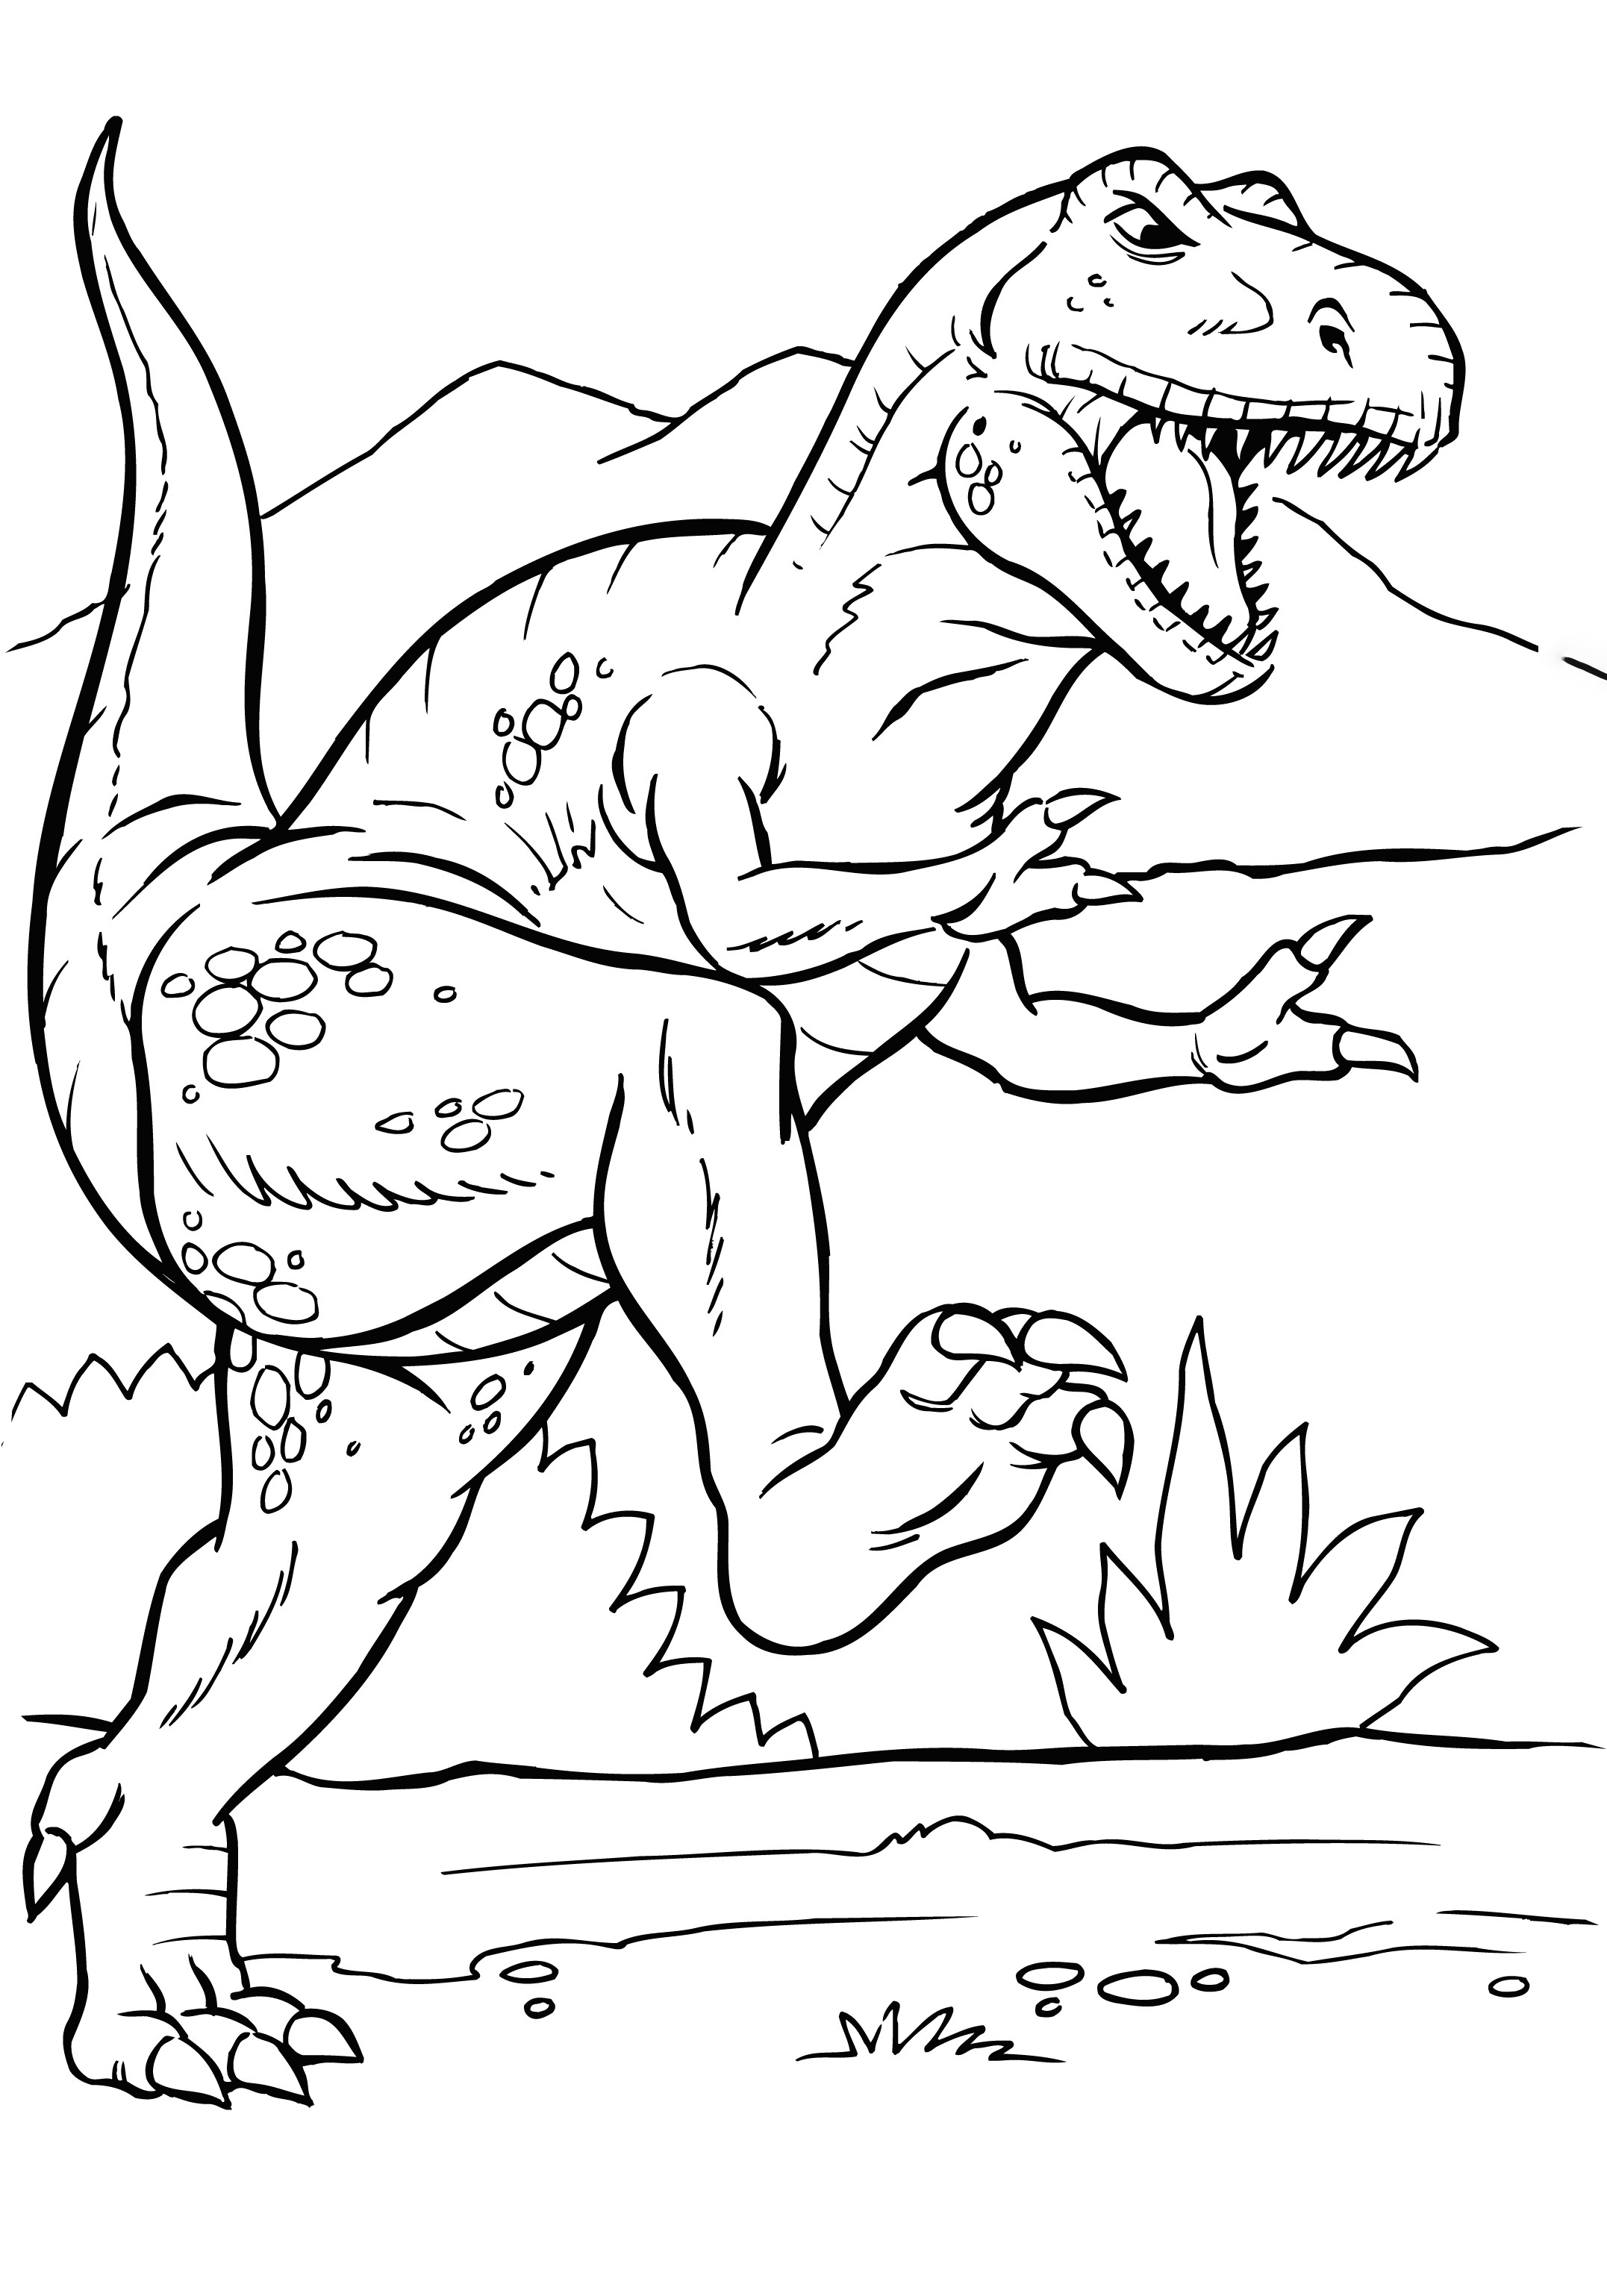 Smiling Allosaurus Coloring Pages Dinosaurs Coloring Pages Coloring